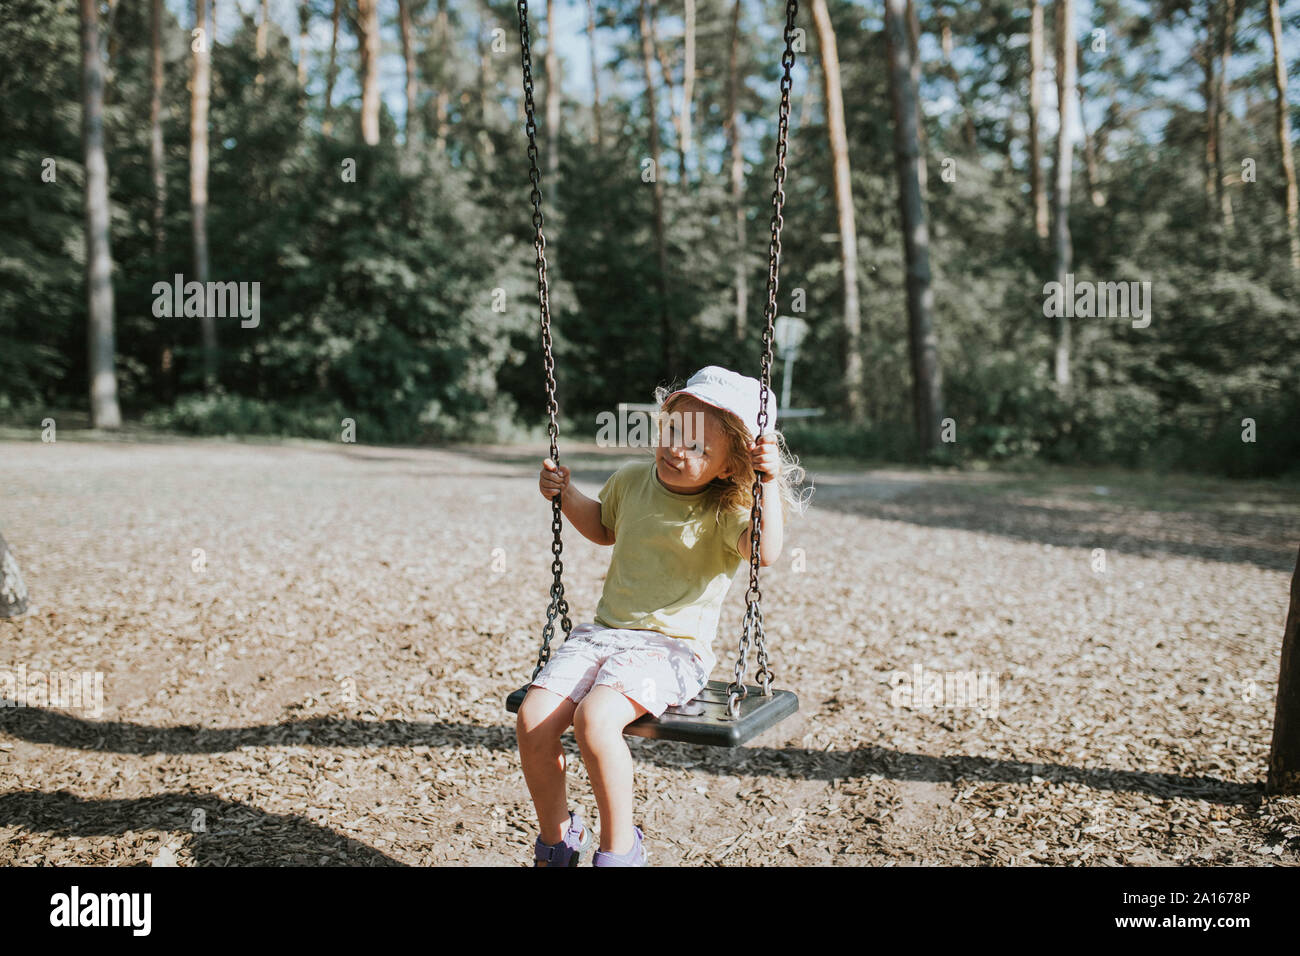 Girl on swing on a playground Stock Photo